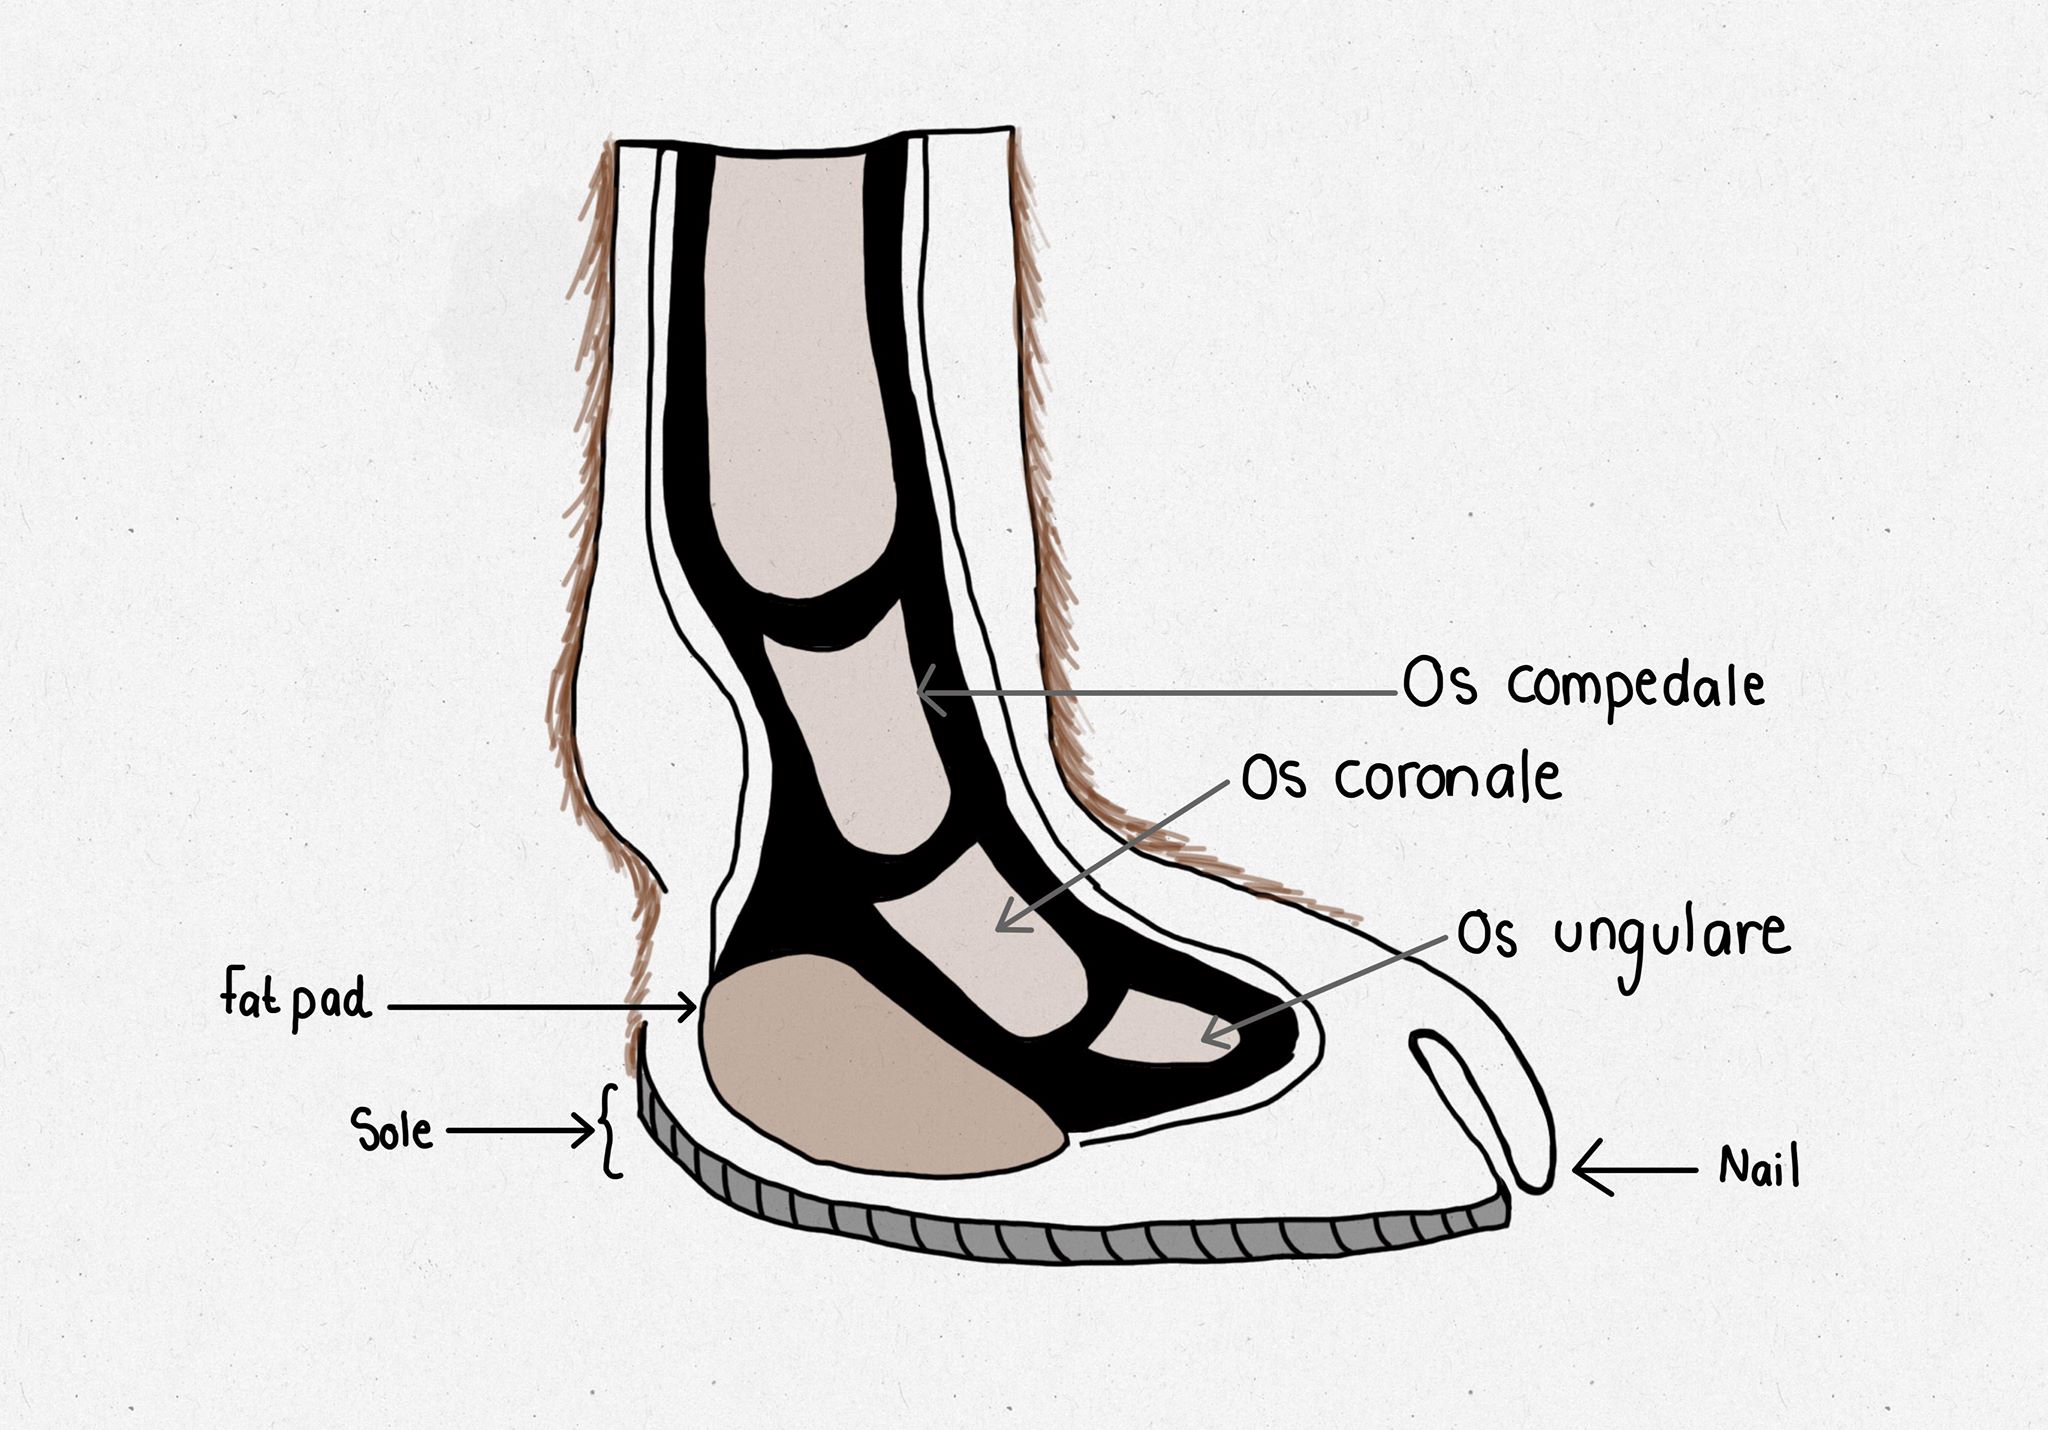 Diagram of the structure of the foot of a camel